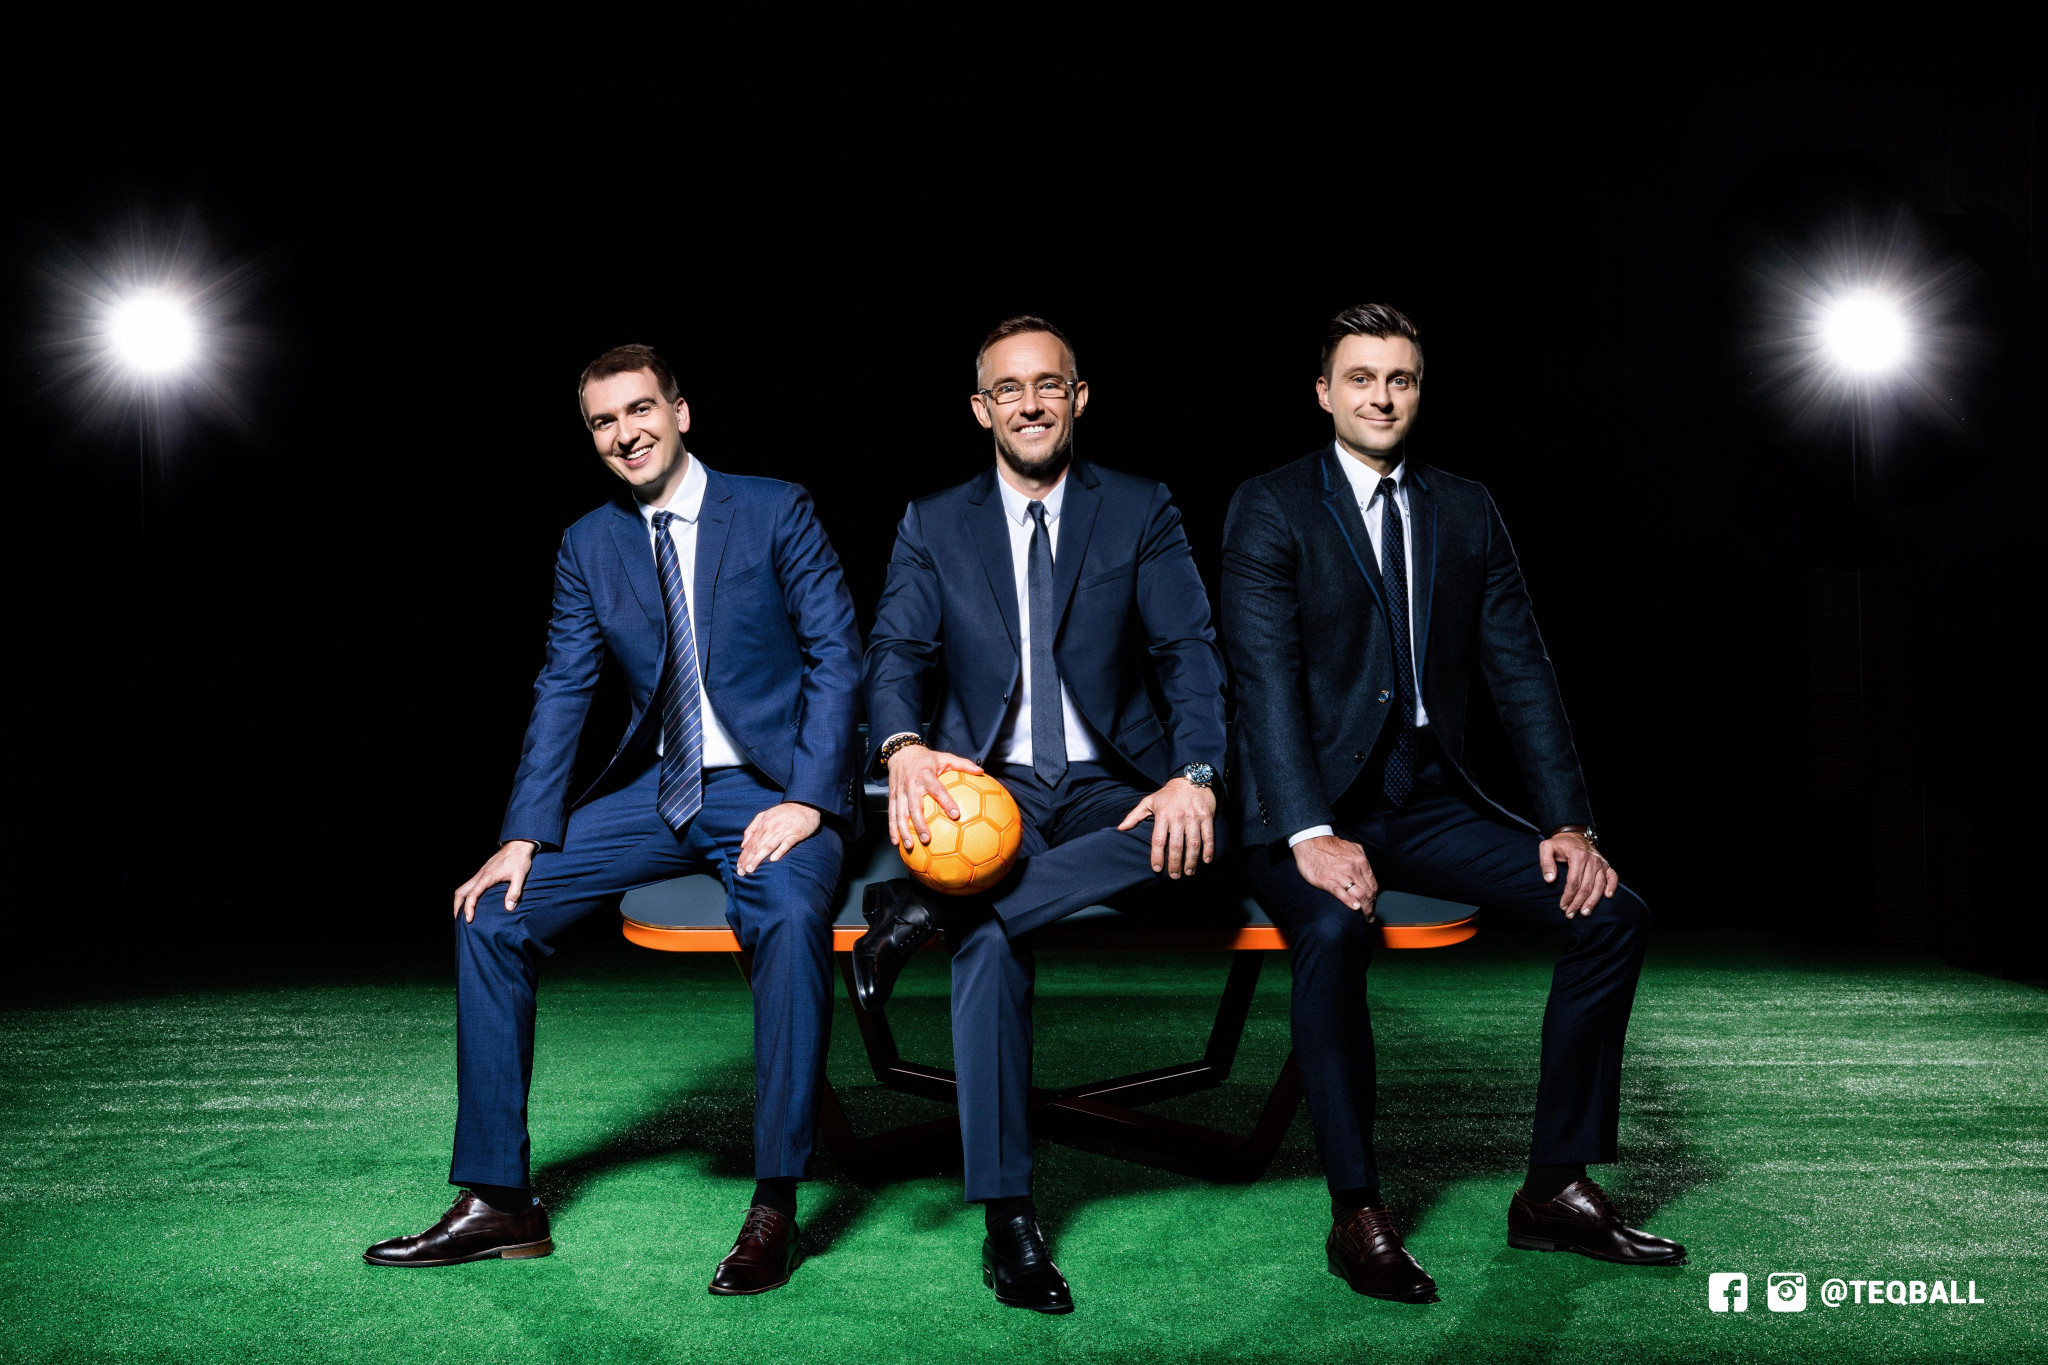 Teqball co-founders (from left) - Gabor Borsanyi, Gyuri Gattyan and Viktor Huszar, have made donations to hospitals and orphanages in Budapest as they aim to lend a helping hand during the coronavirus pandemic ©FITEQ